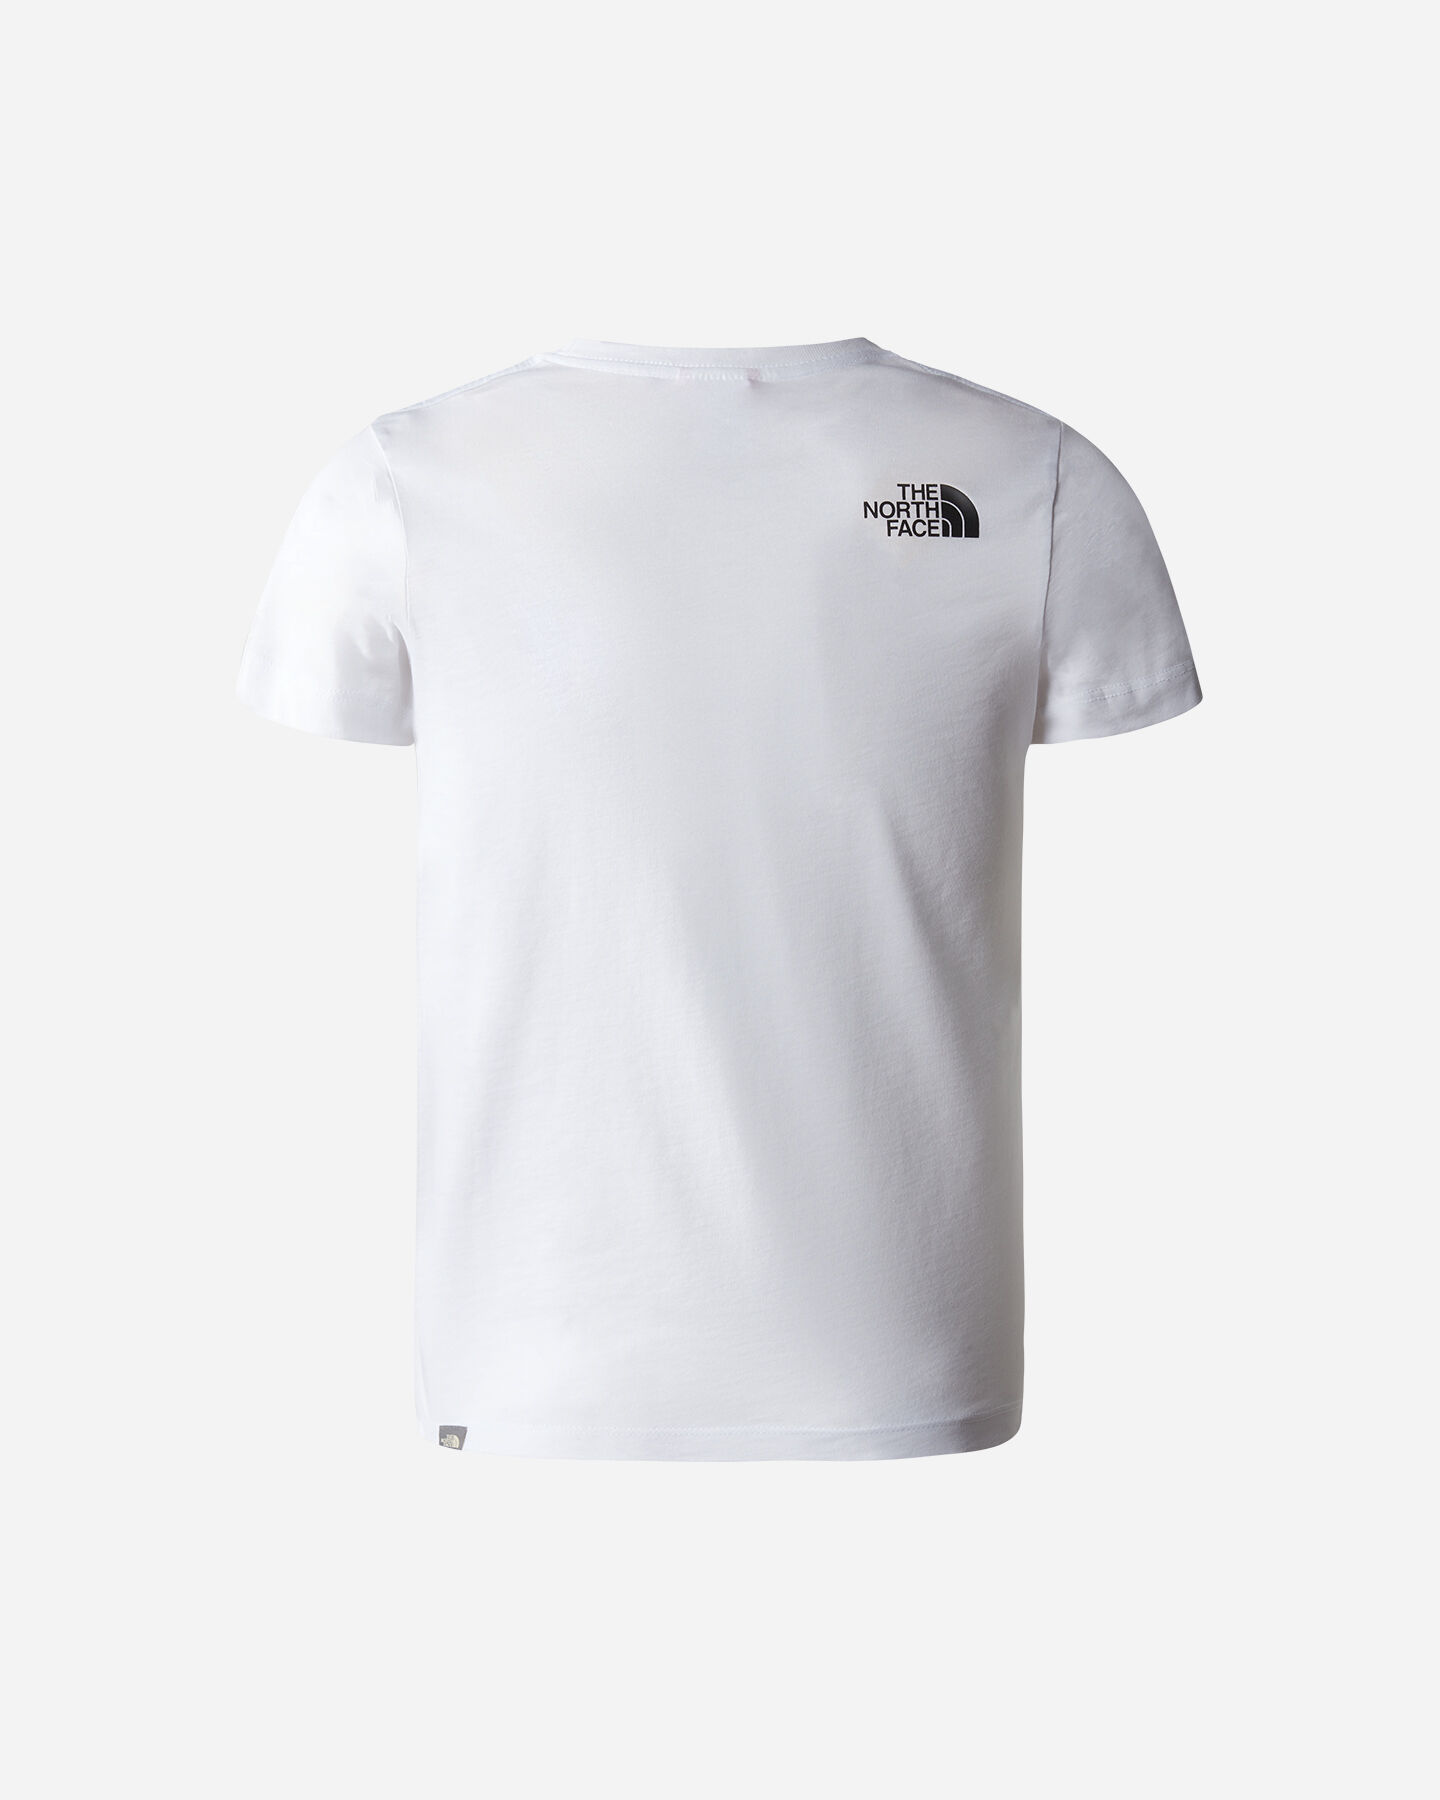  T-Shirt THE NORTH FACE SIMPLE DOME JR S5537336|FN4|S scatto 1